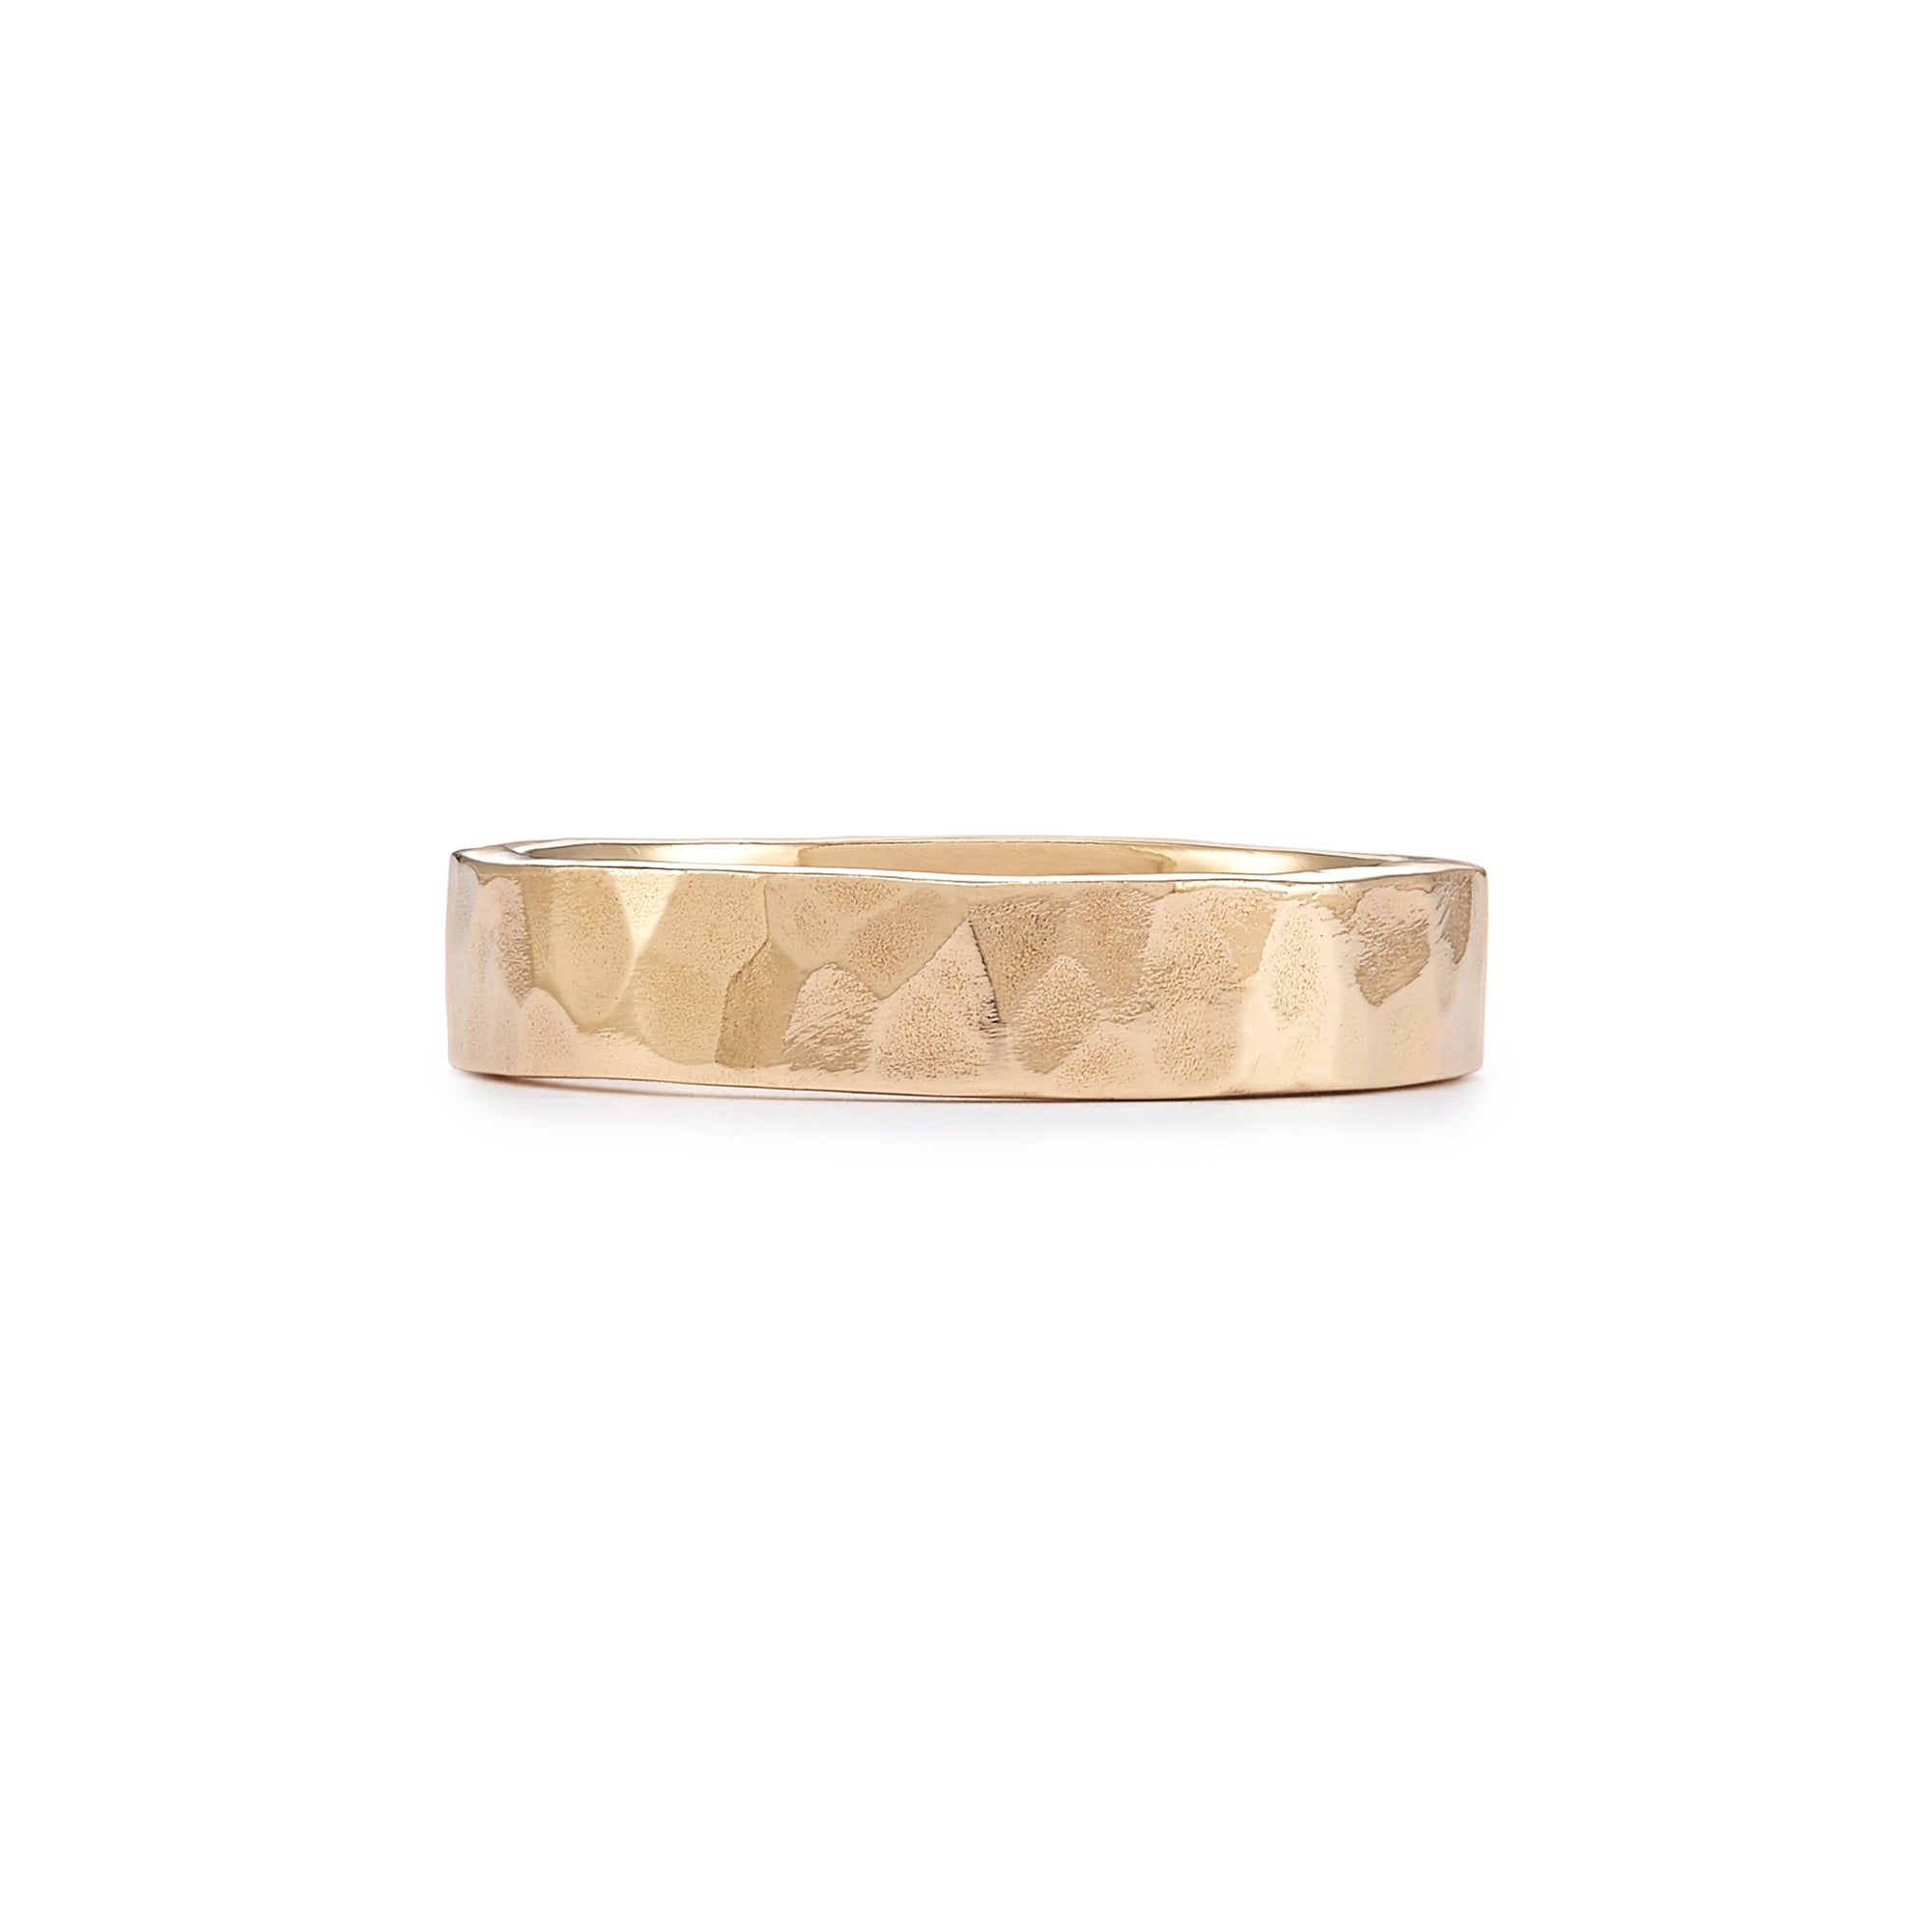 The unisex 4.5mm Classic Band in 14k gold is a timeless ring featuring a lovely hammered texture with a soft matte finish